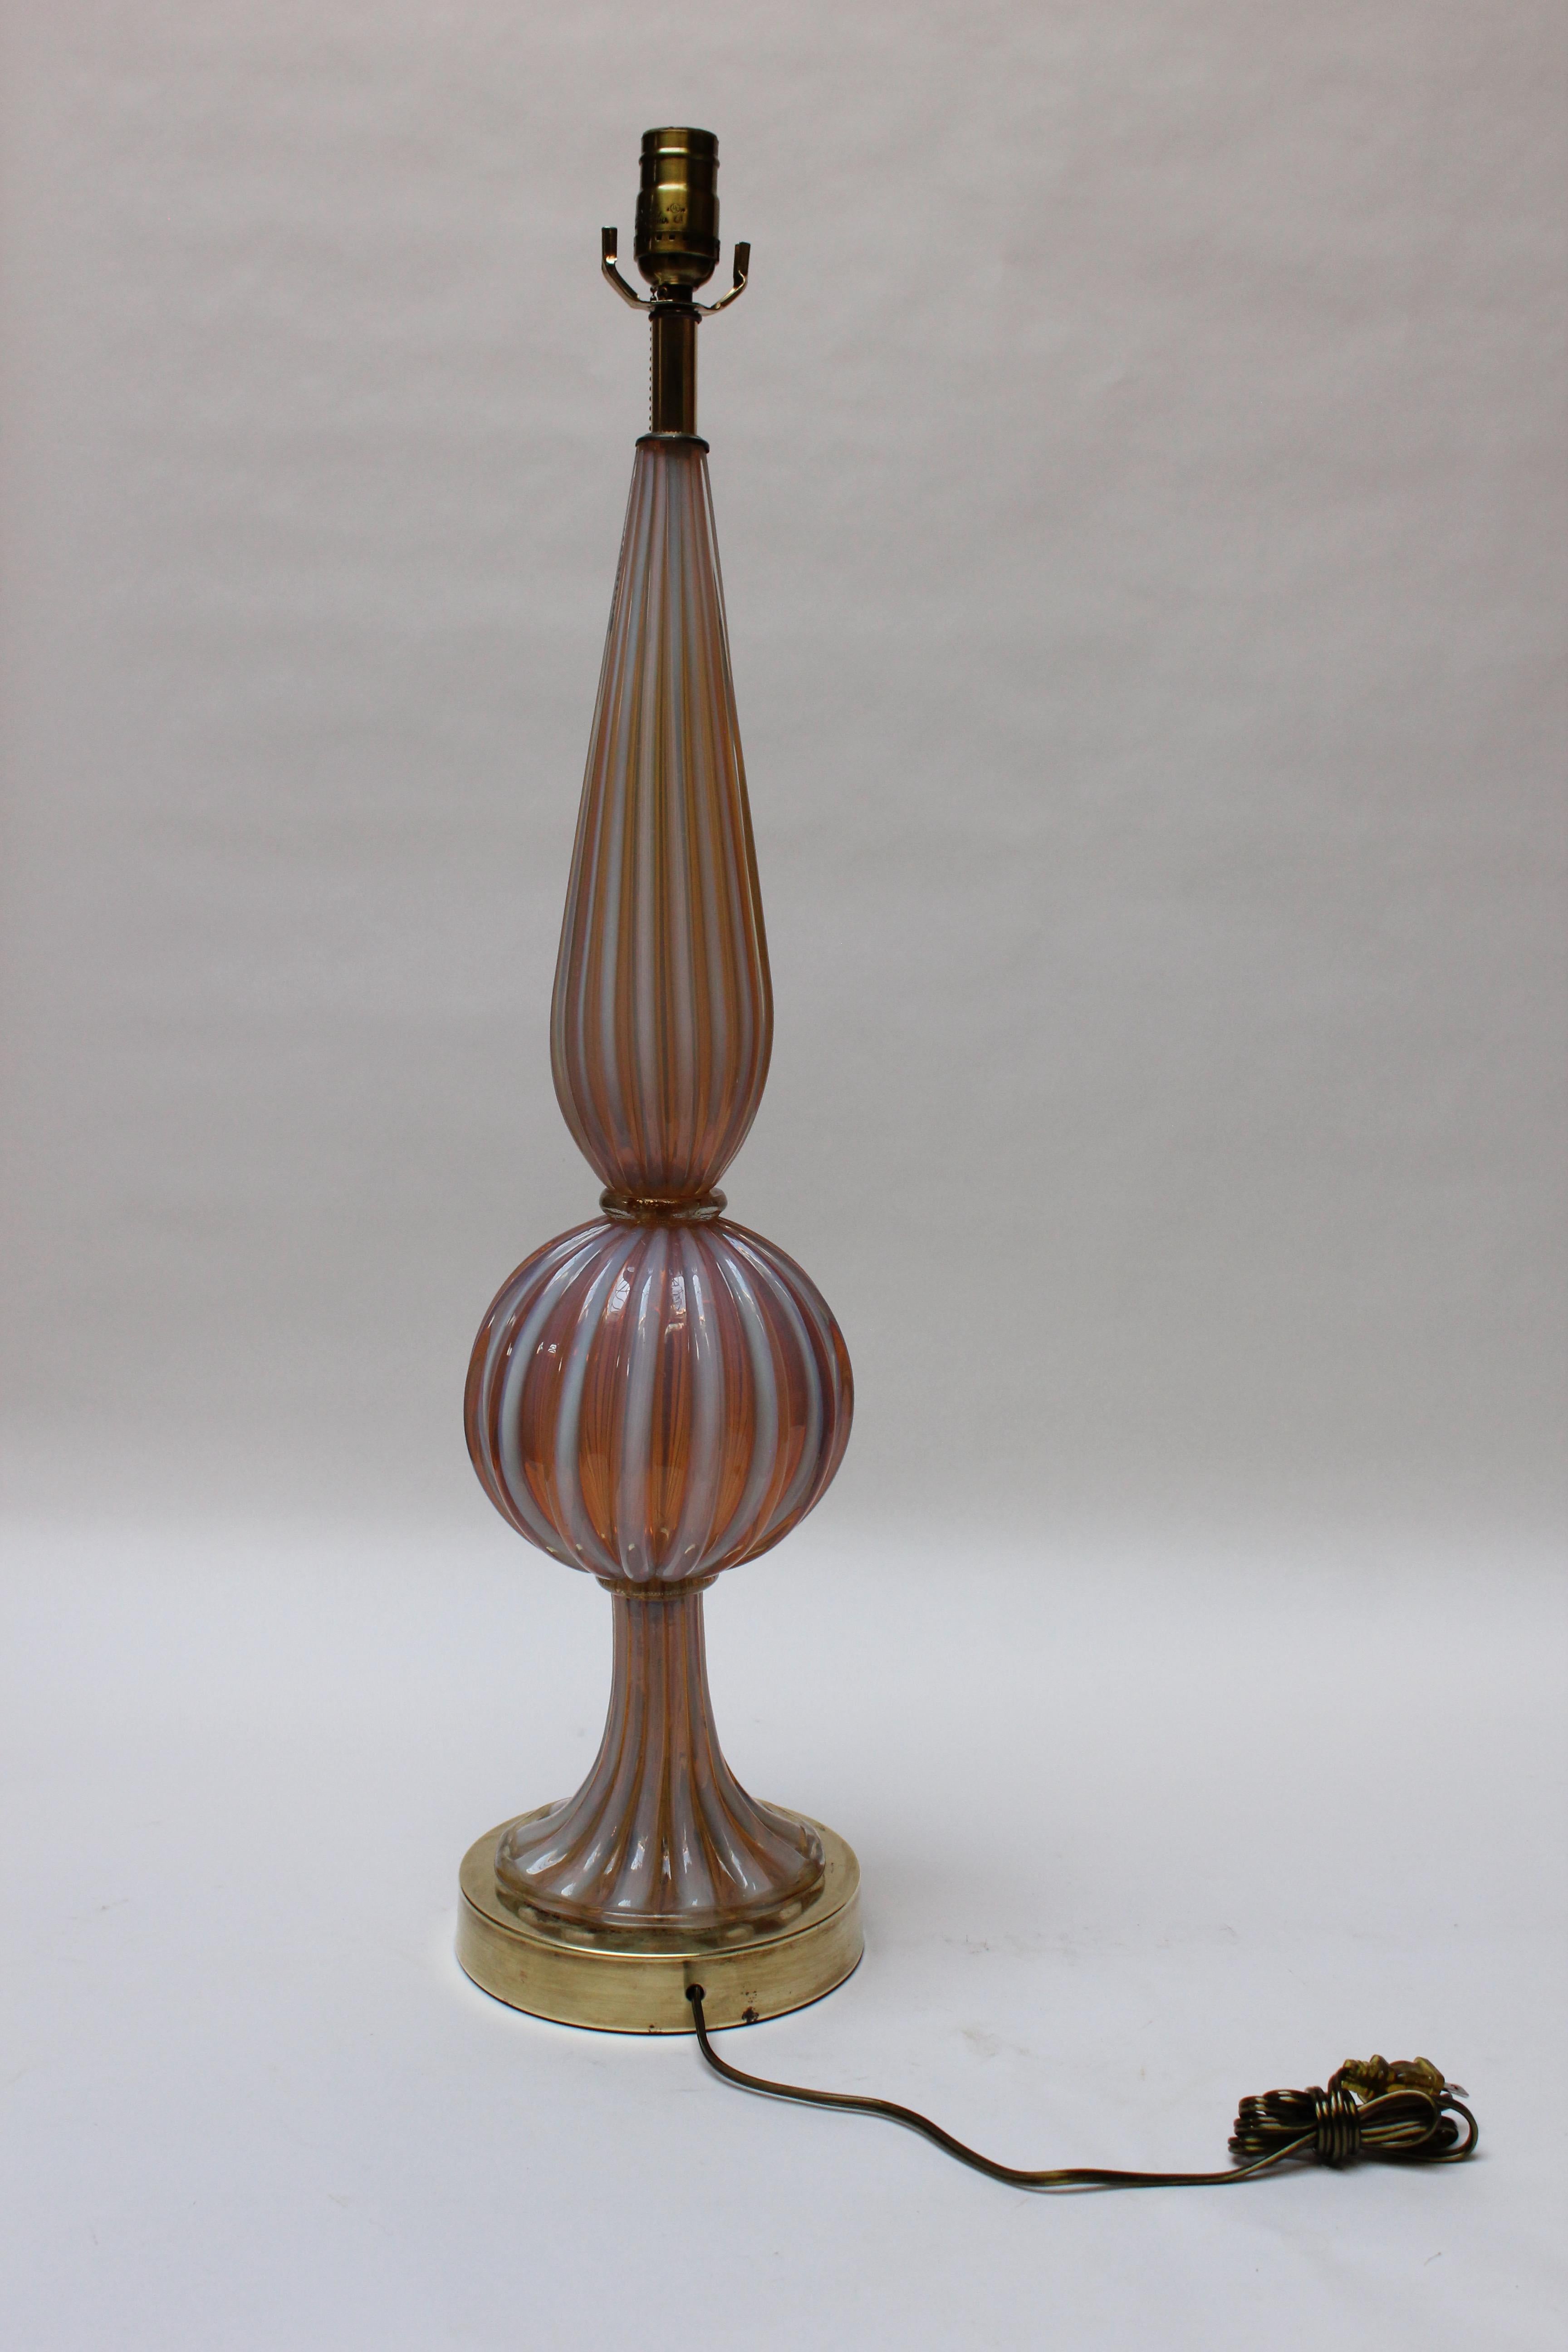 Impressive, sizable Venetian murano blown translucent glass table lamp with baluster form in periwinkle and pink stripes with gold flecks (ca. late 1930s / early 1940s, Italy). Brass circular support shows spots of tarnish. The lamp itself shows